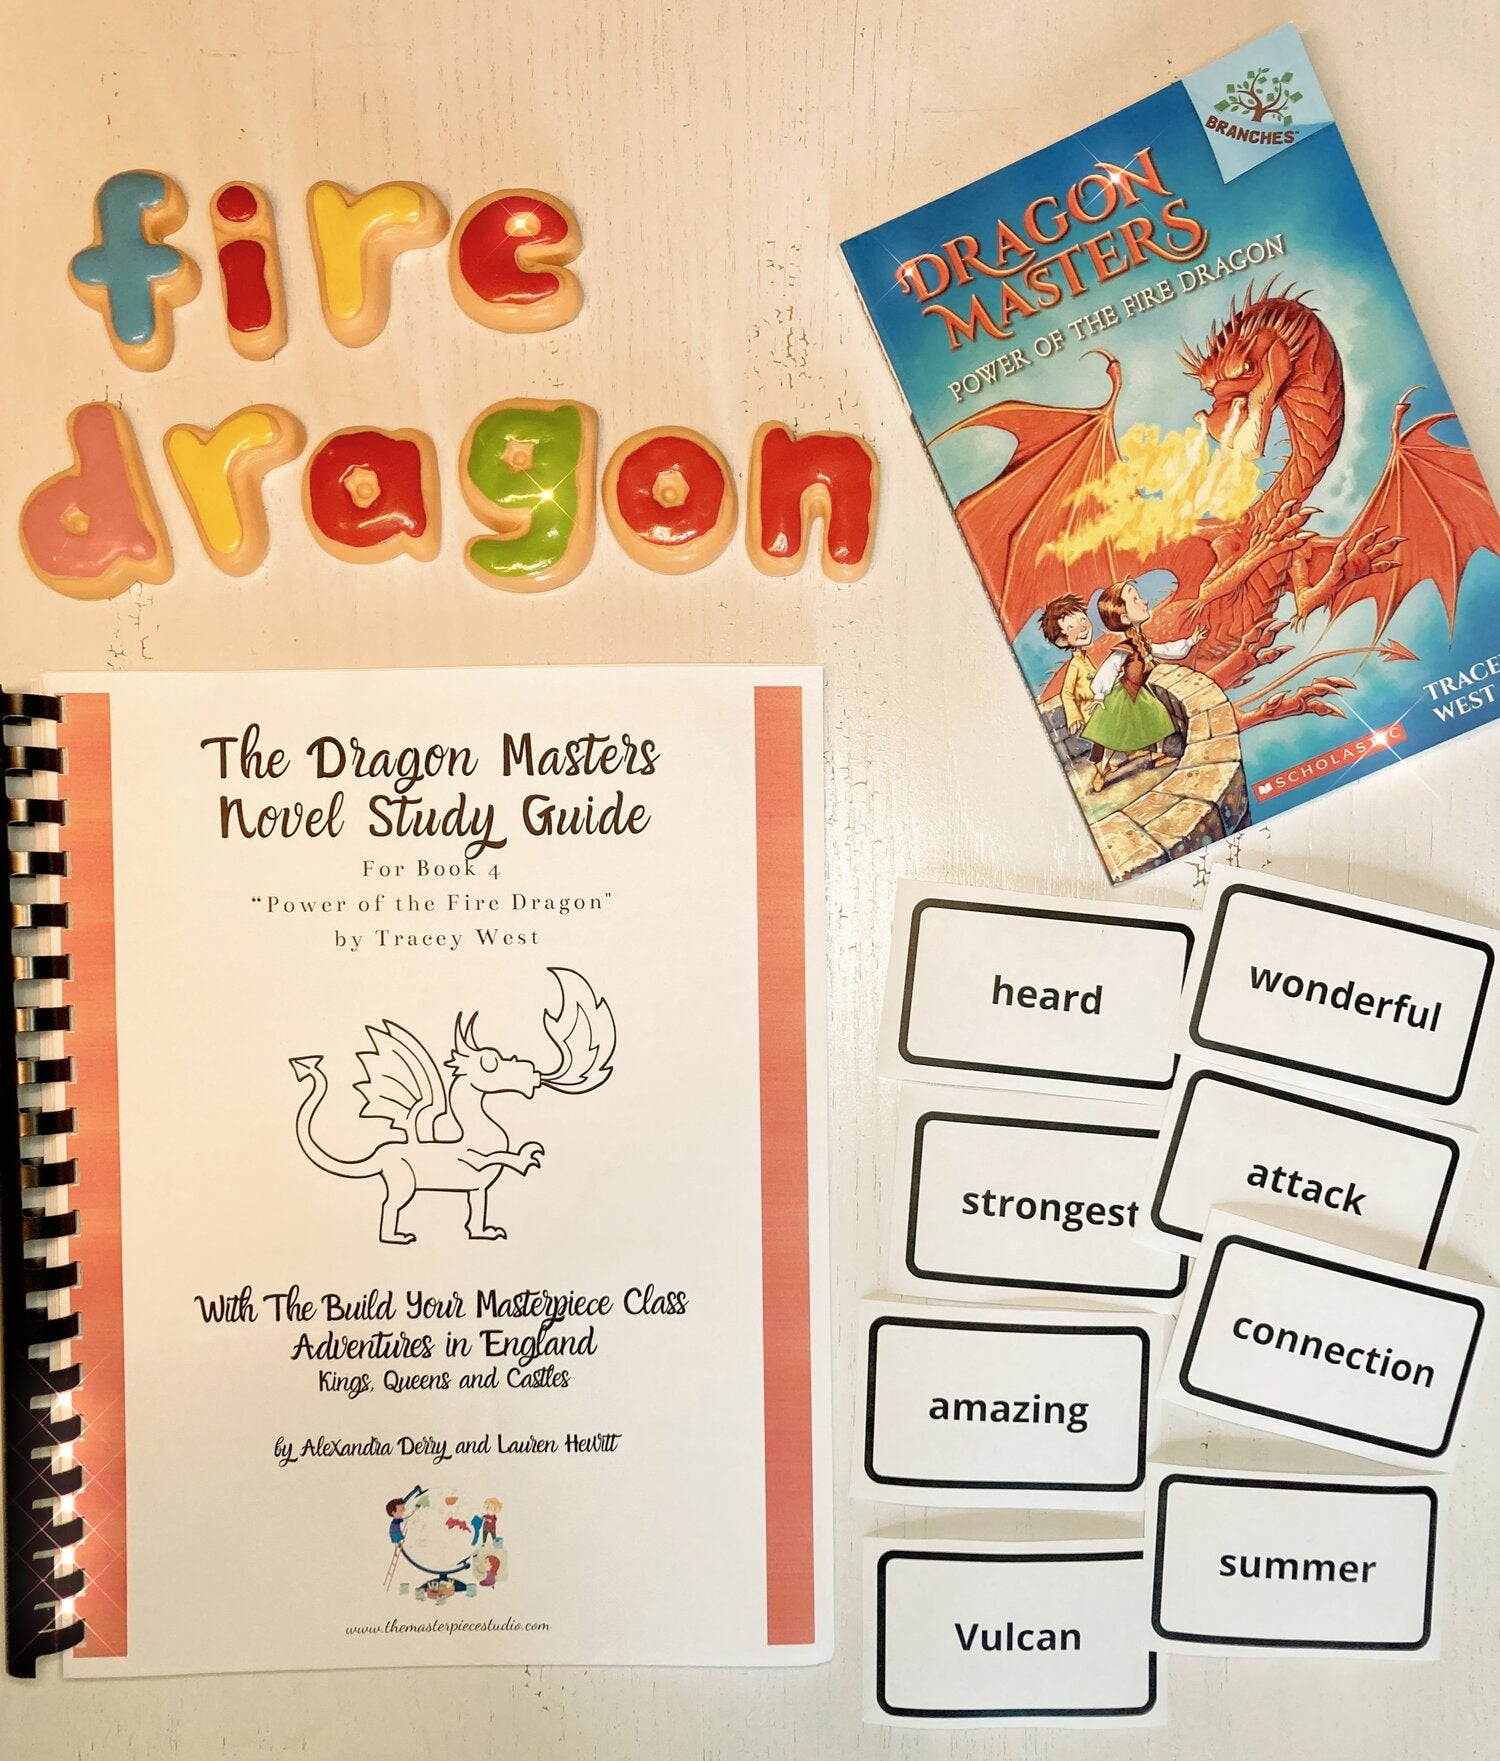 The Dragon Masters Novel Study Guide: Book 4 "Power of the Fire Dragon"